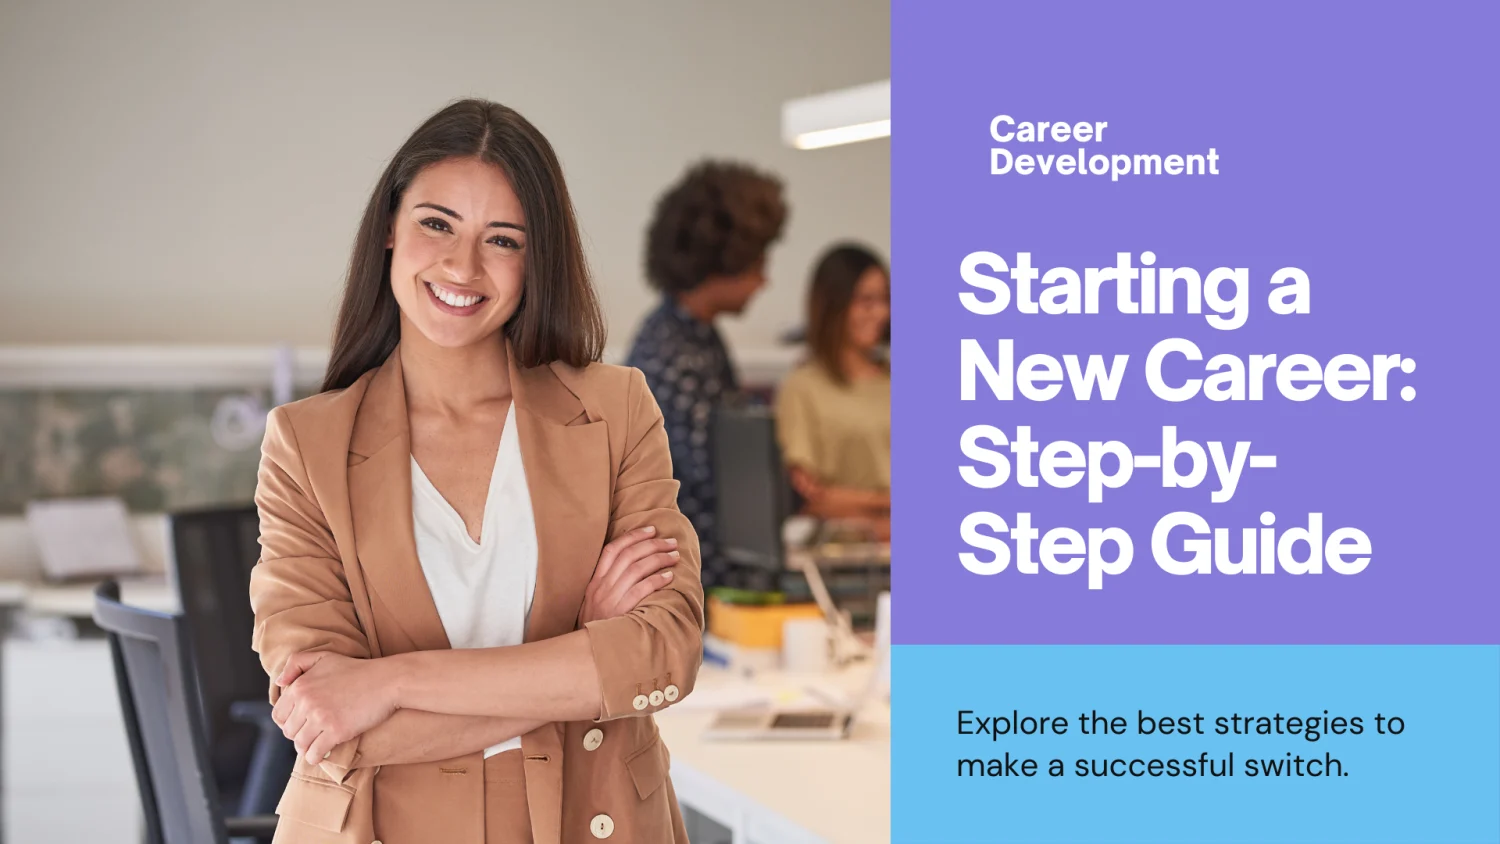  How to Start a New Career in 2023 - Step-by-Step Guide